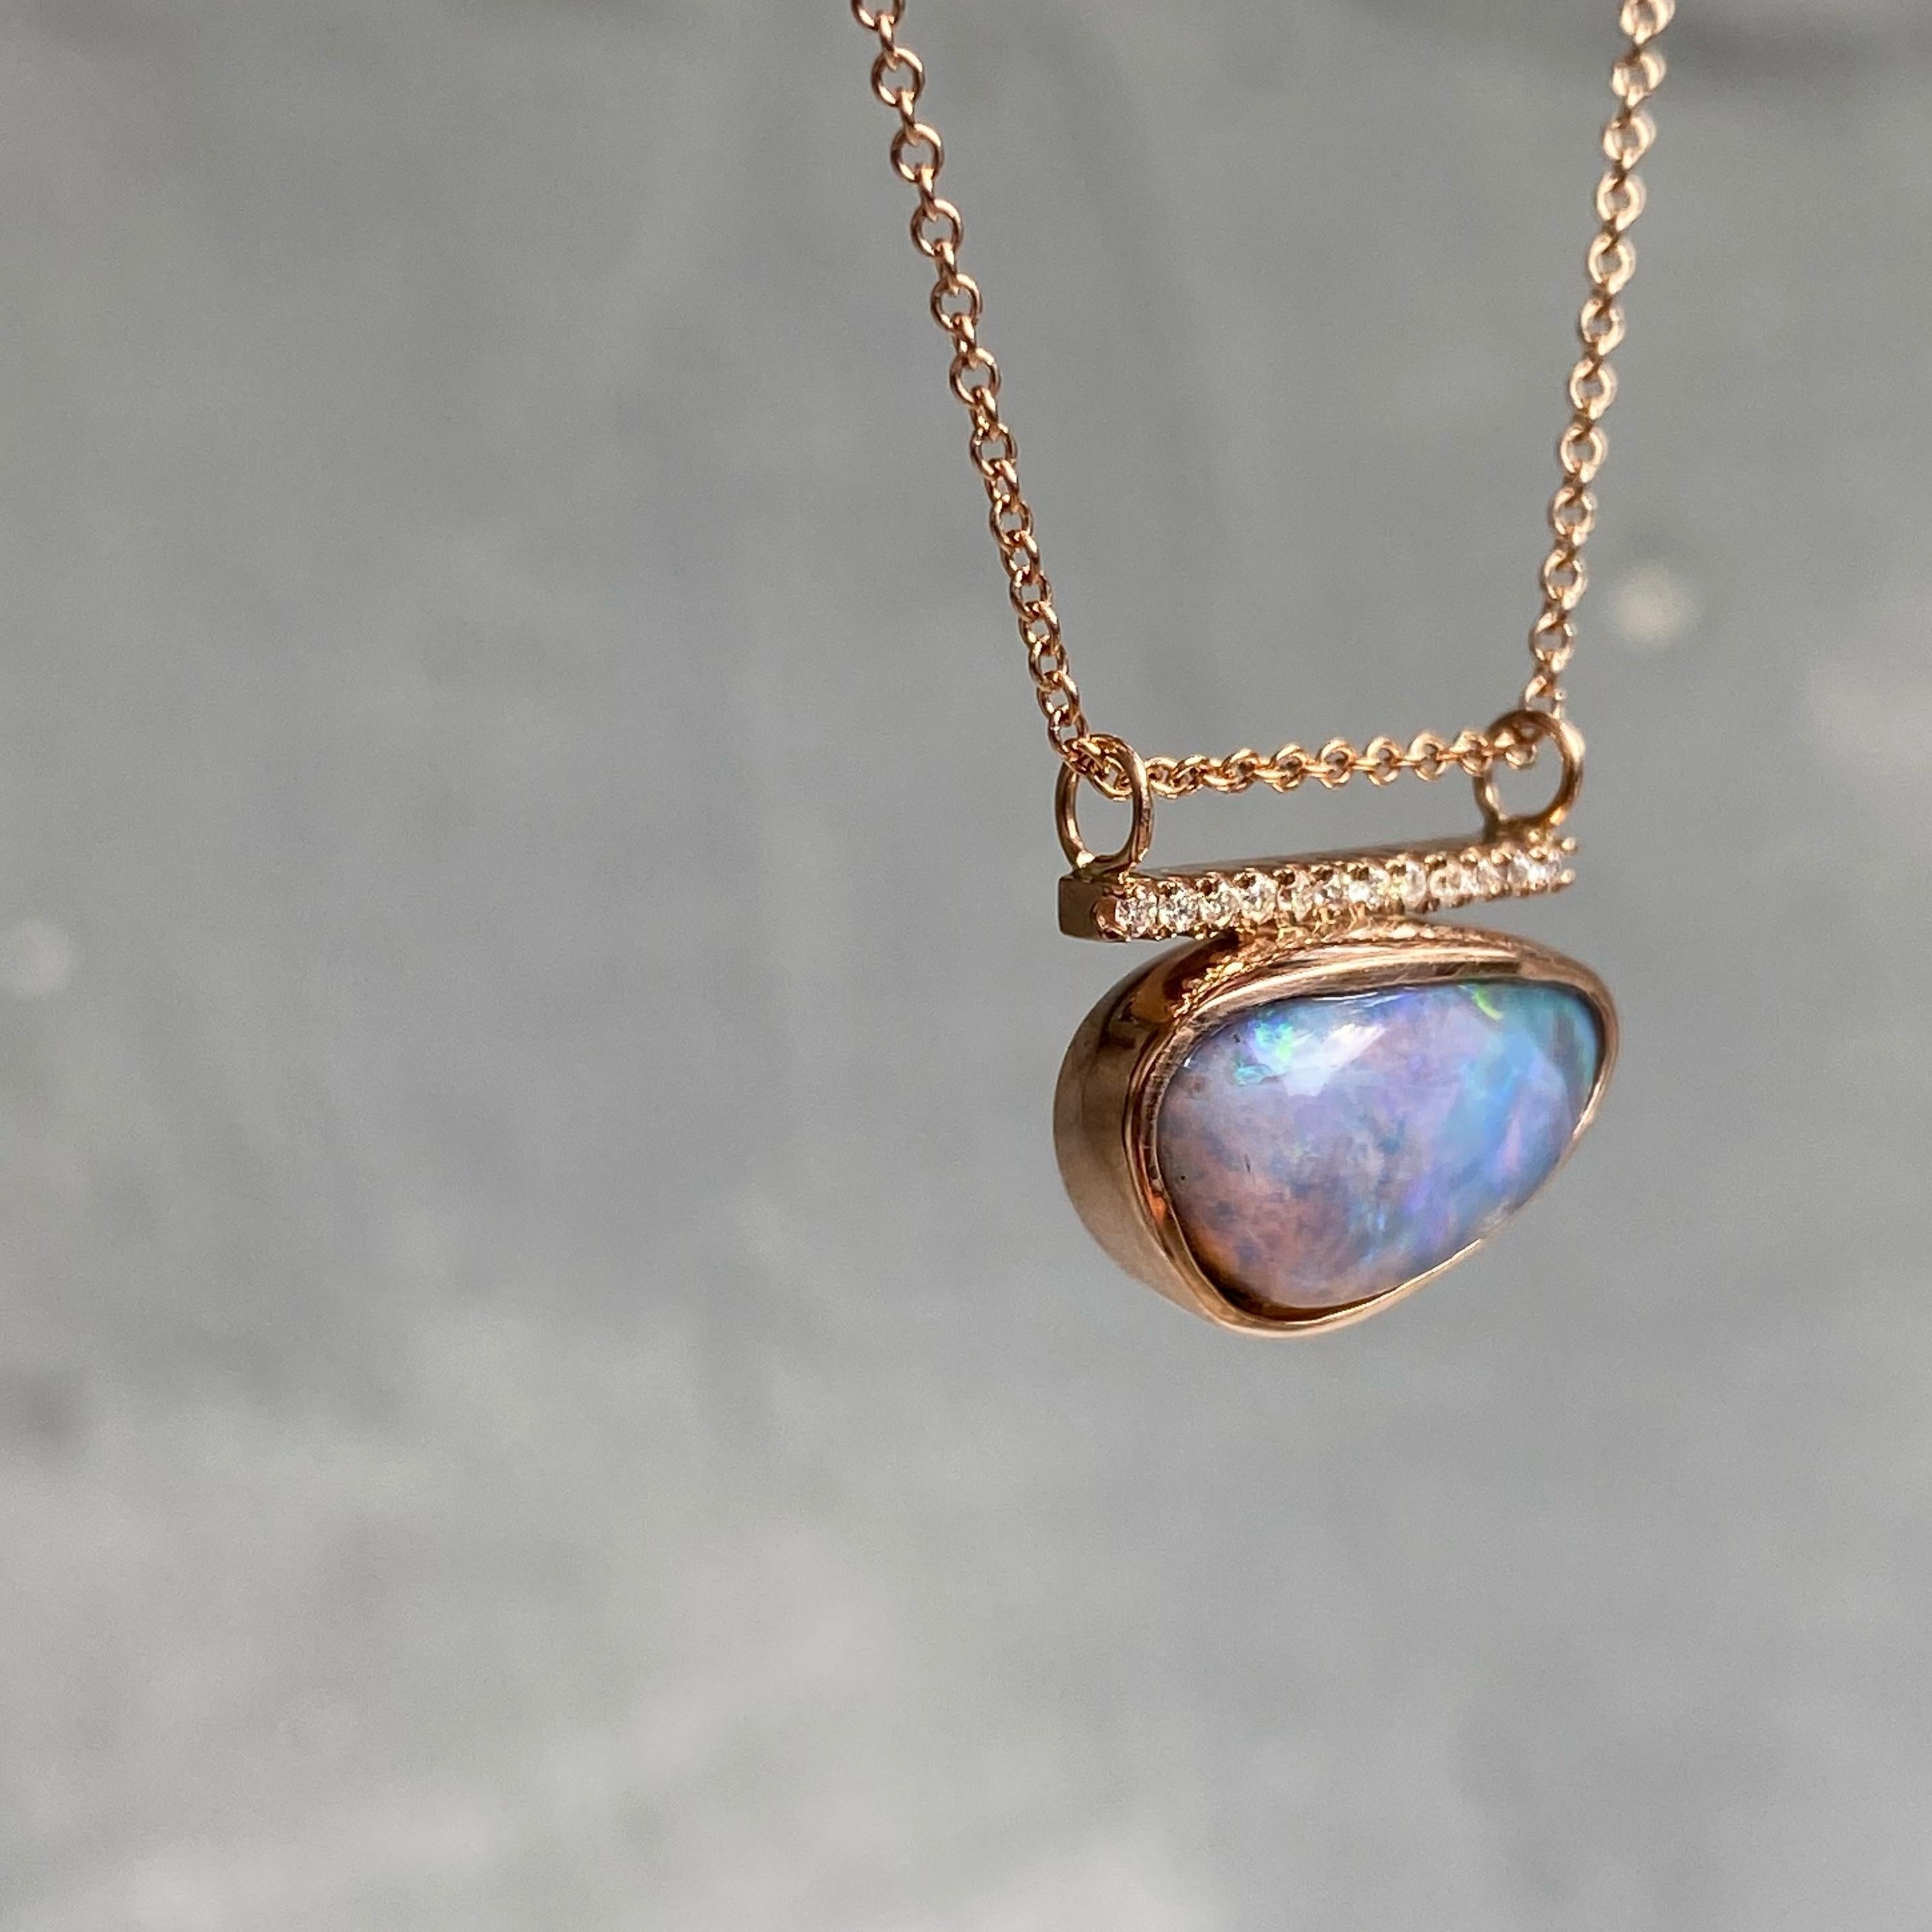 Brilliant Cut Head in the Clouds Rose Gold Opal Necklace No. 15 with Diamonds by NIXIN Jewelry